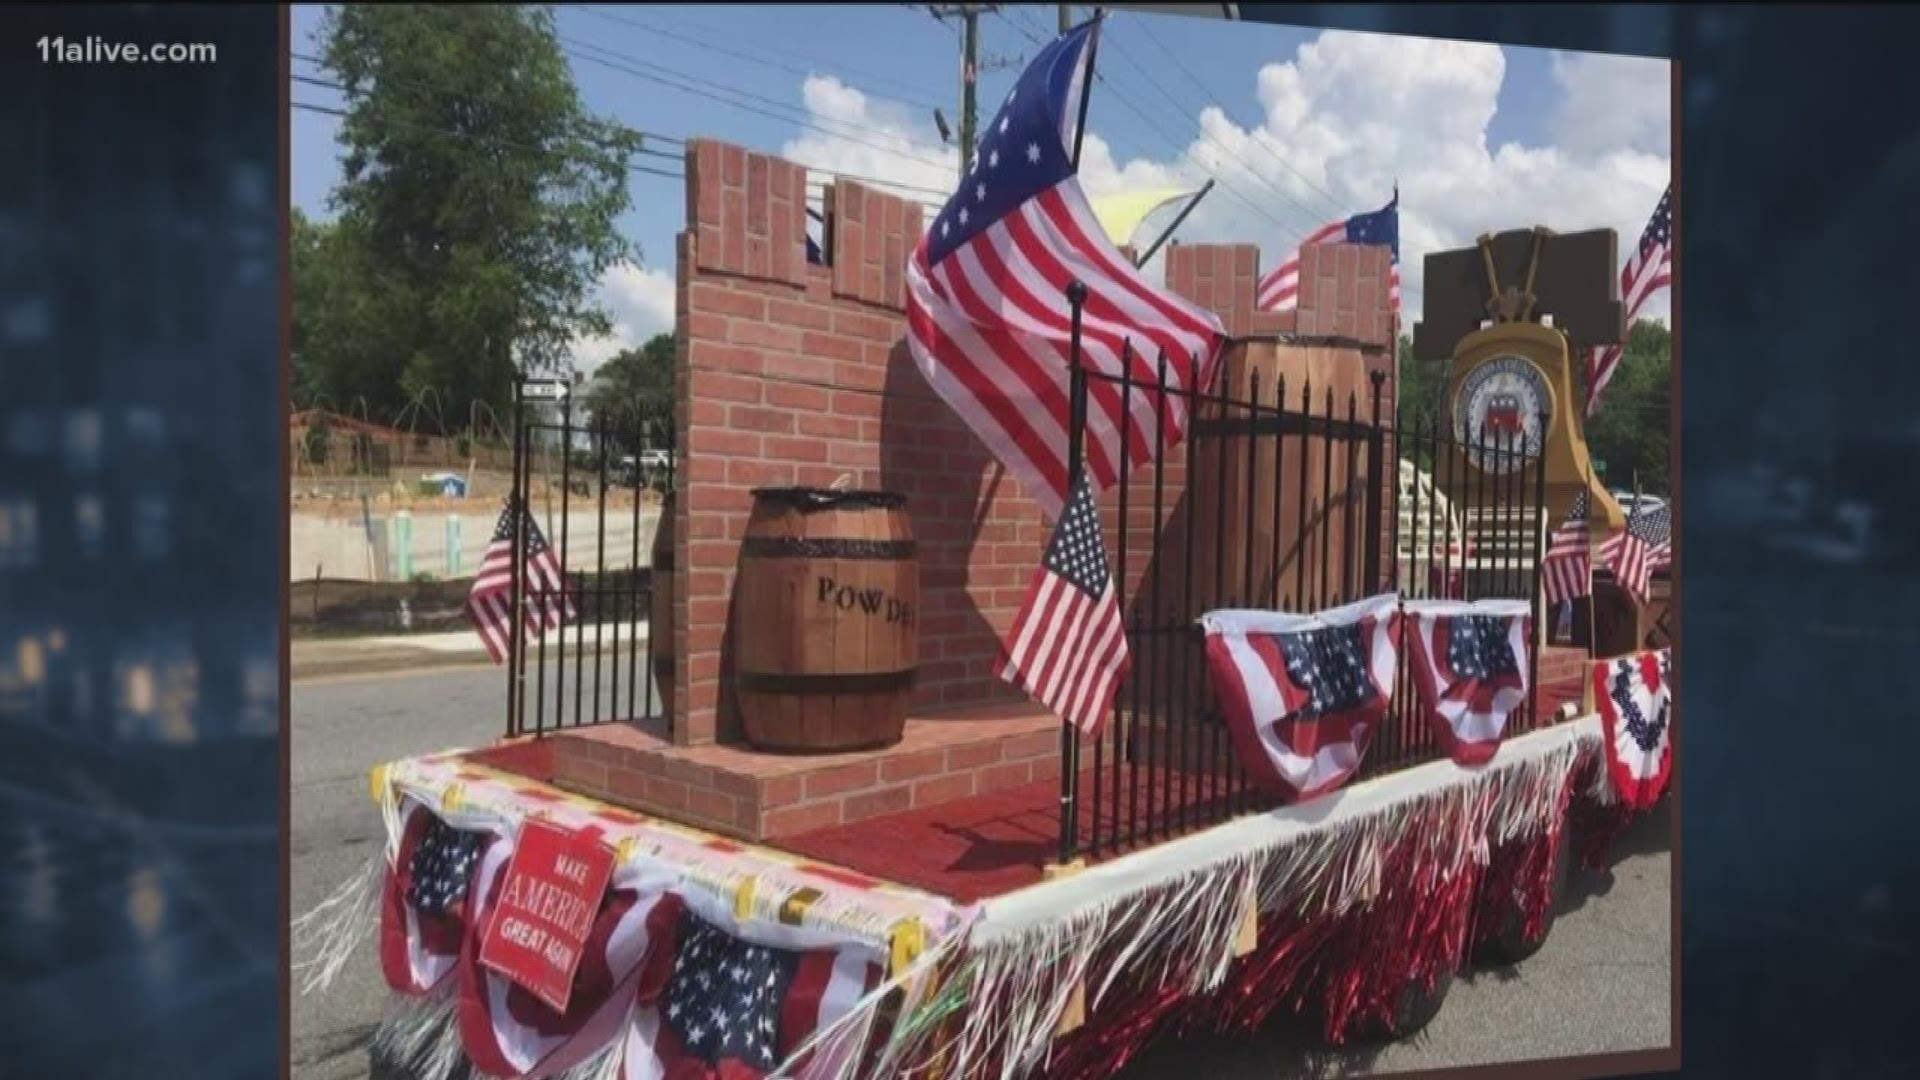 Controversy surrounds politicallycharged float in Marietta July Fourth